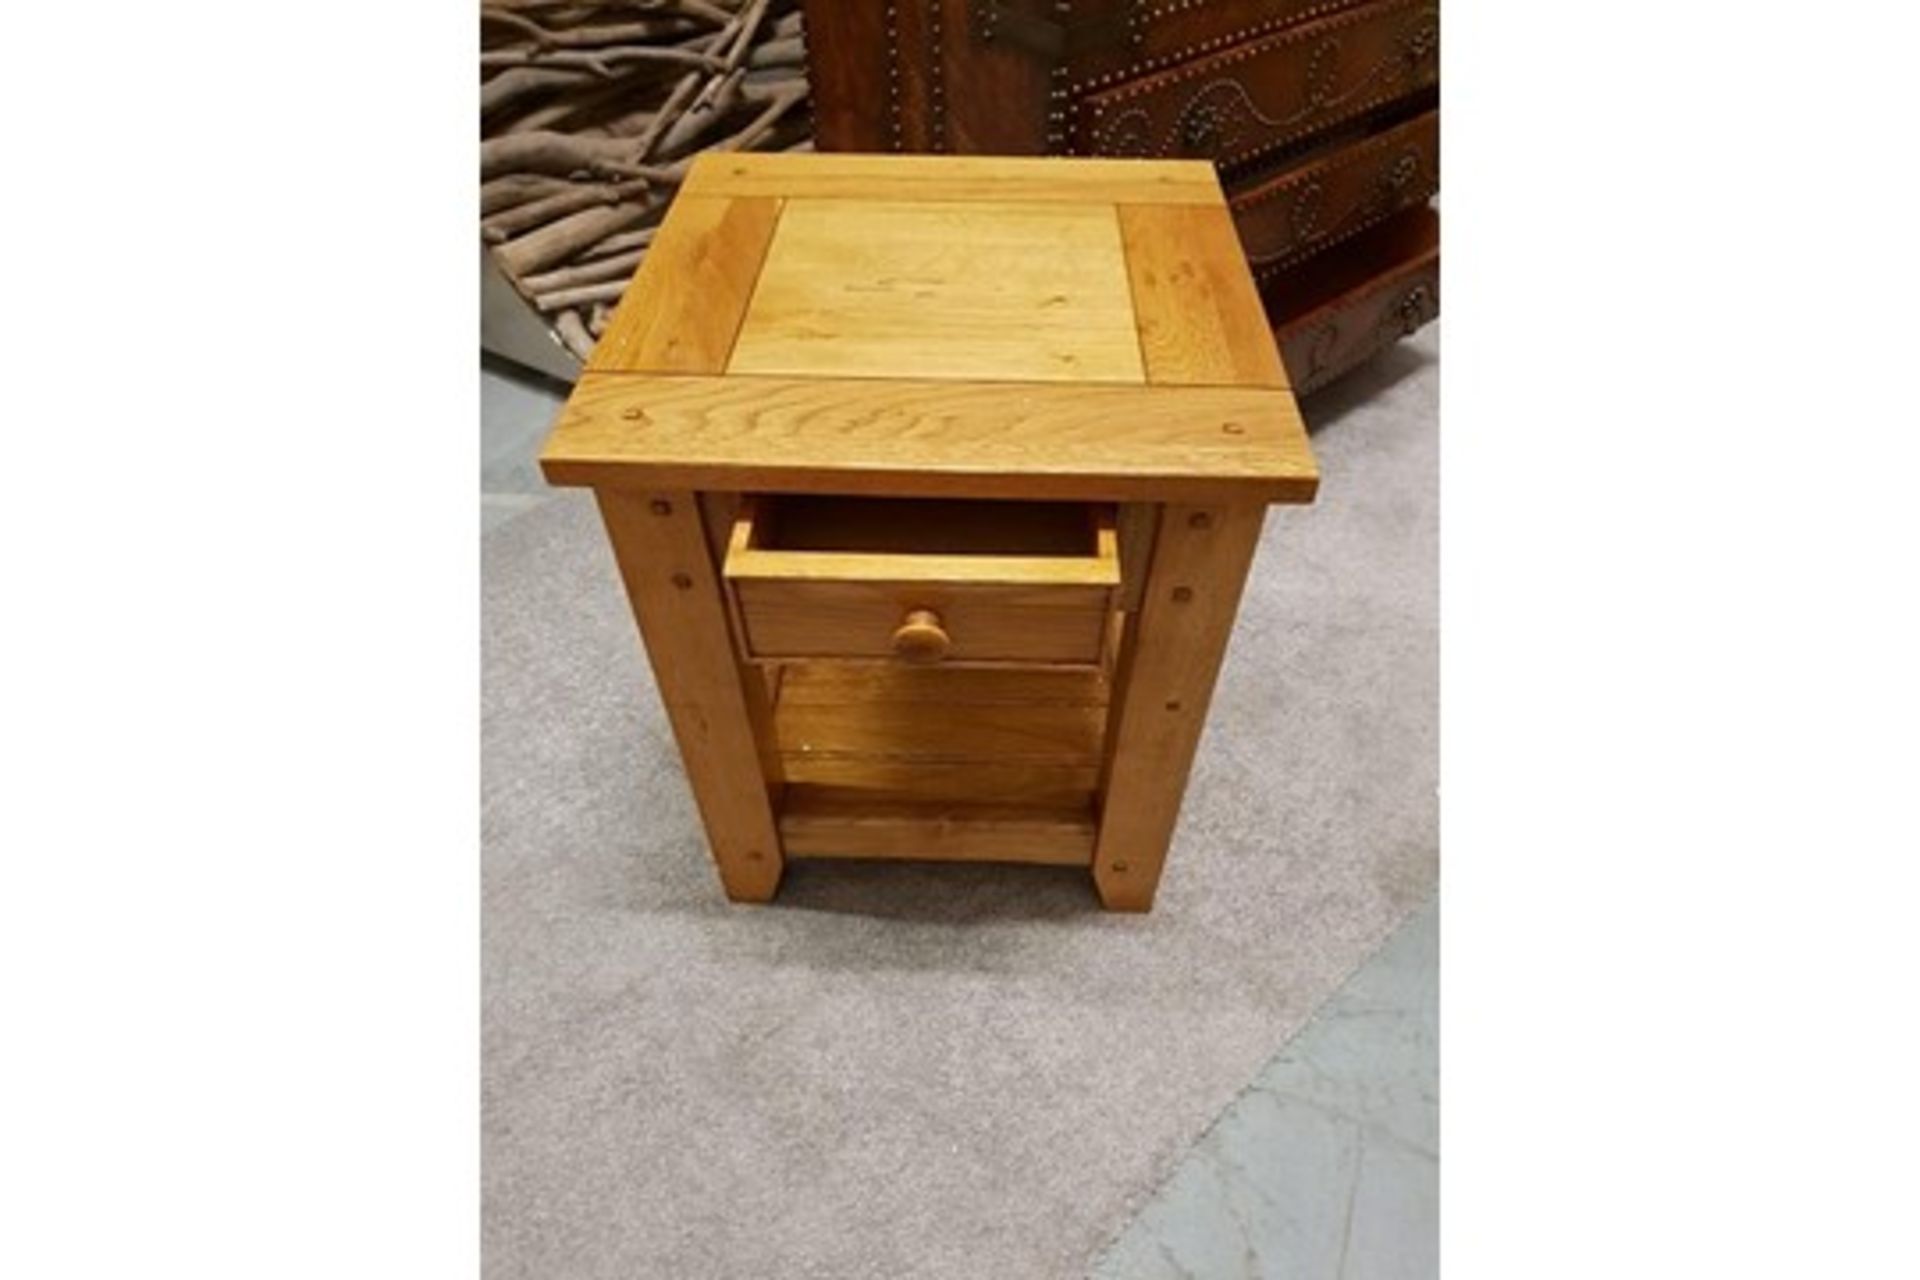 Table Wentworth Oak Side Table Crafted Using Hand Selected Solid Oak Wood And Hand Distressed